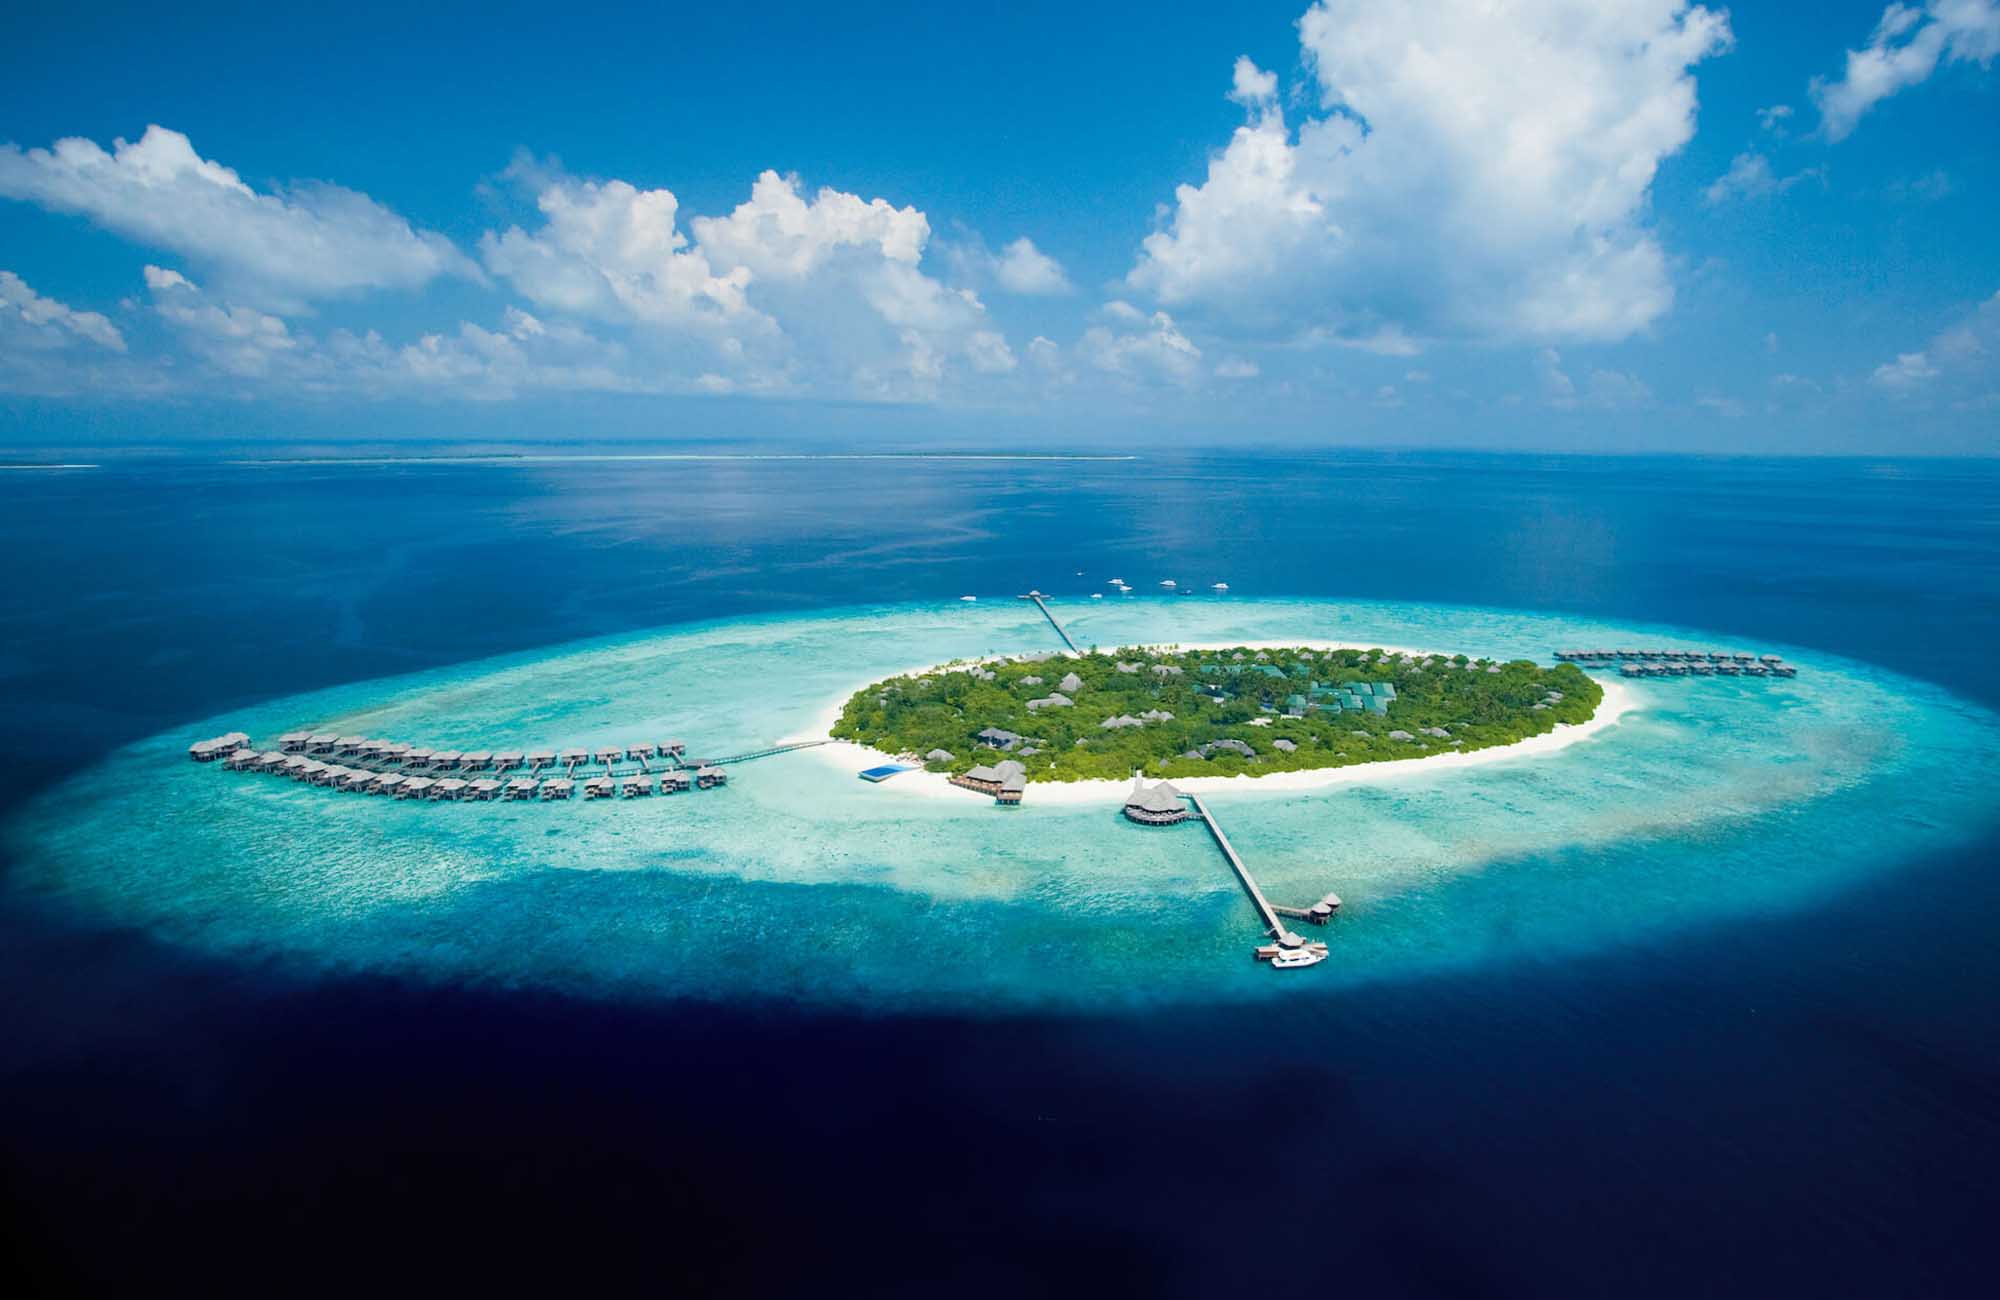 24/7 Barefoot Luxury in the Maldives